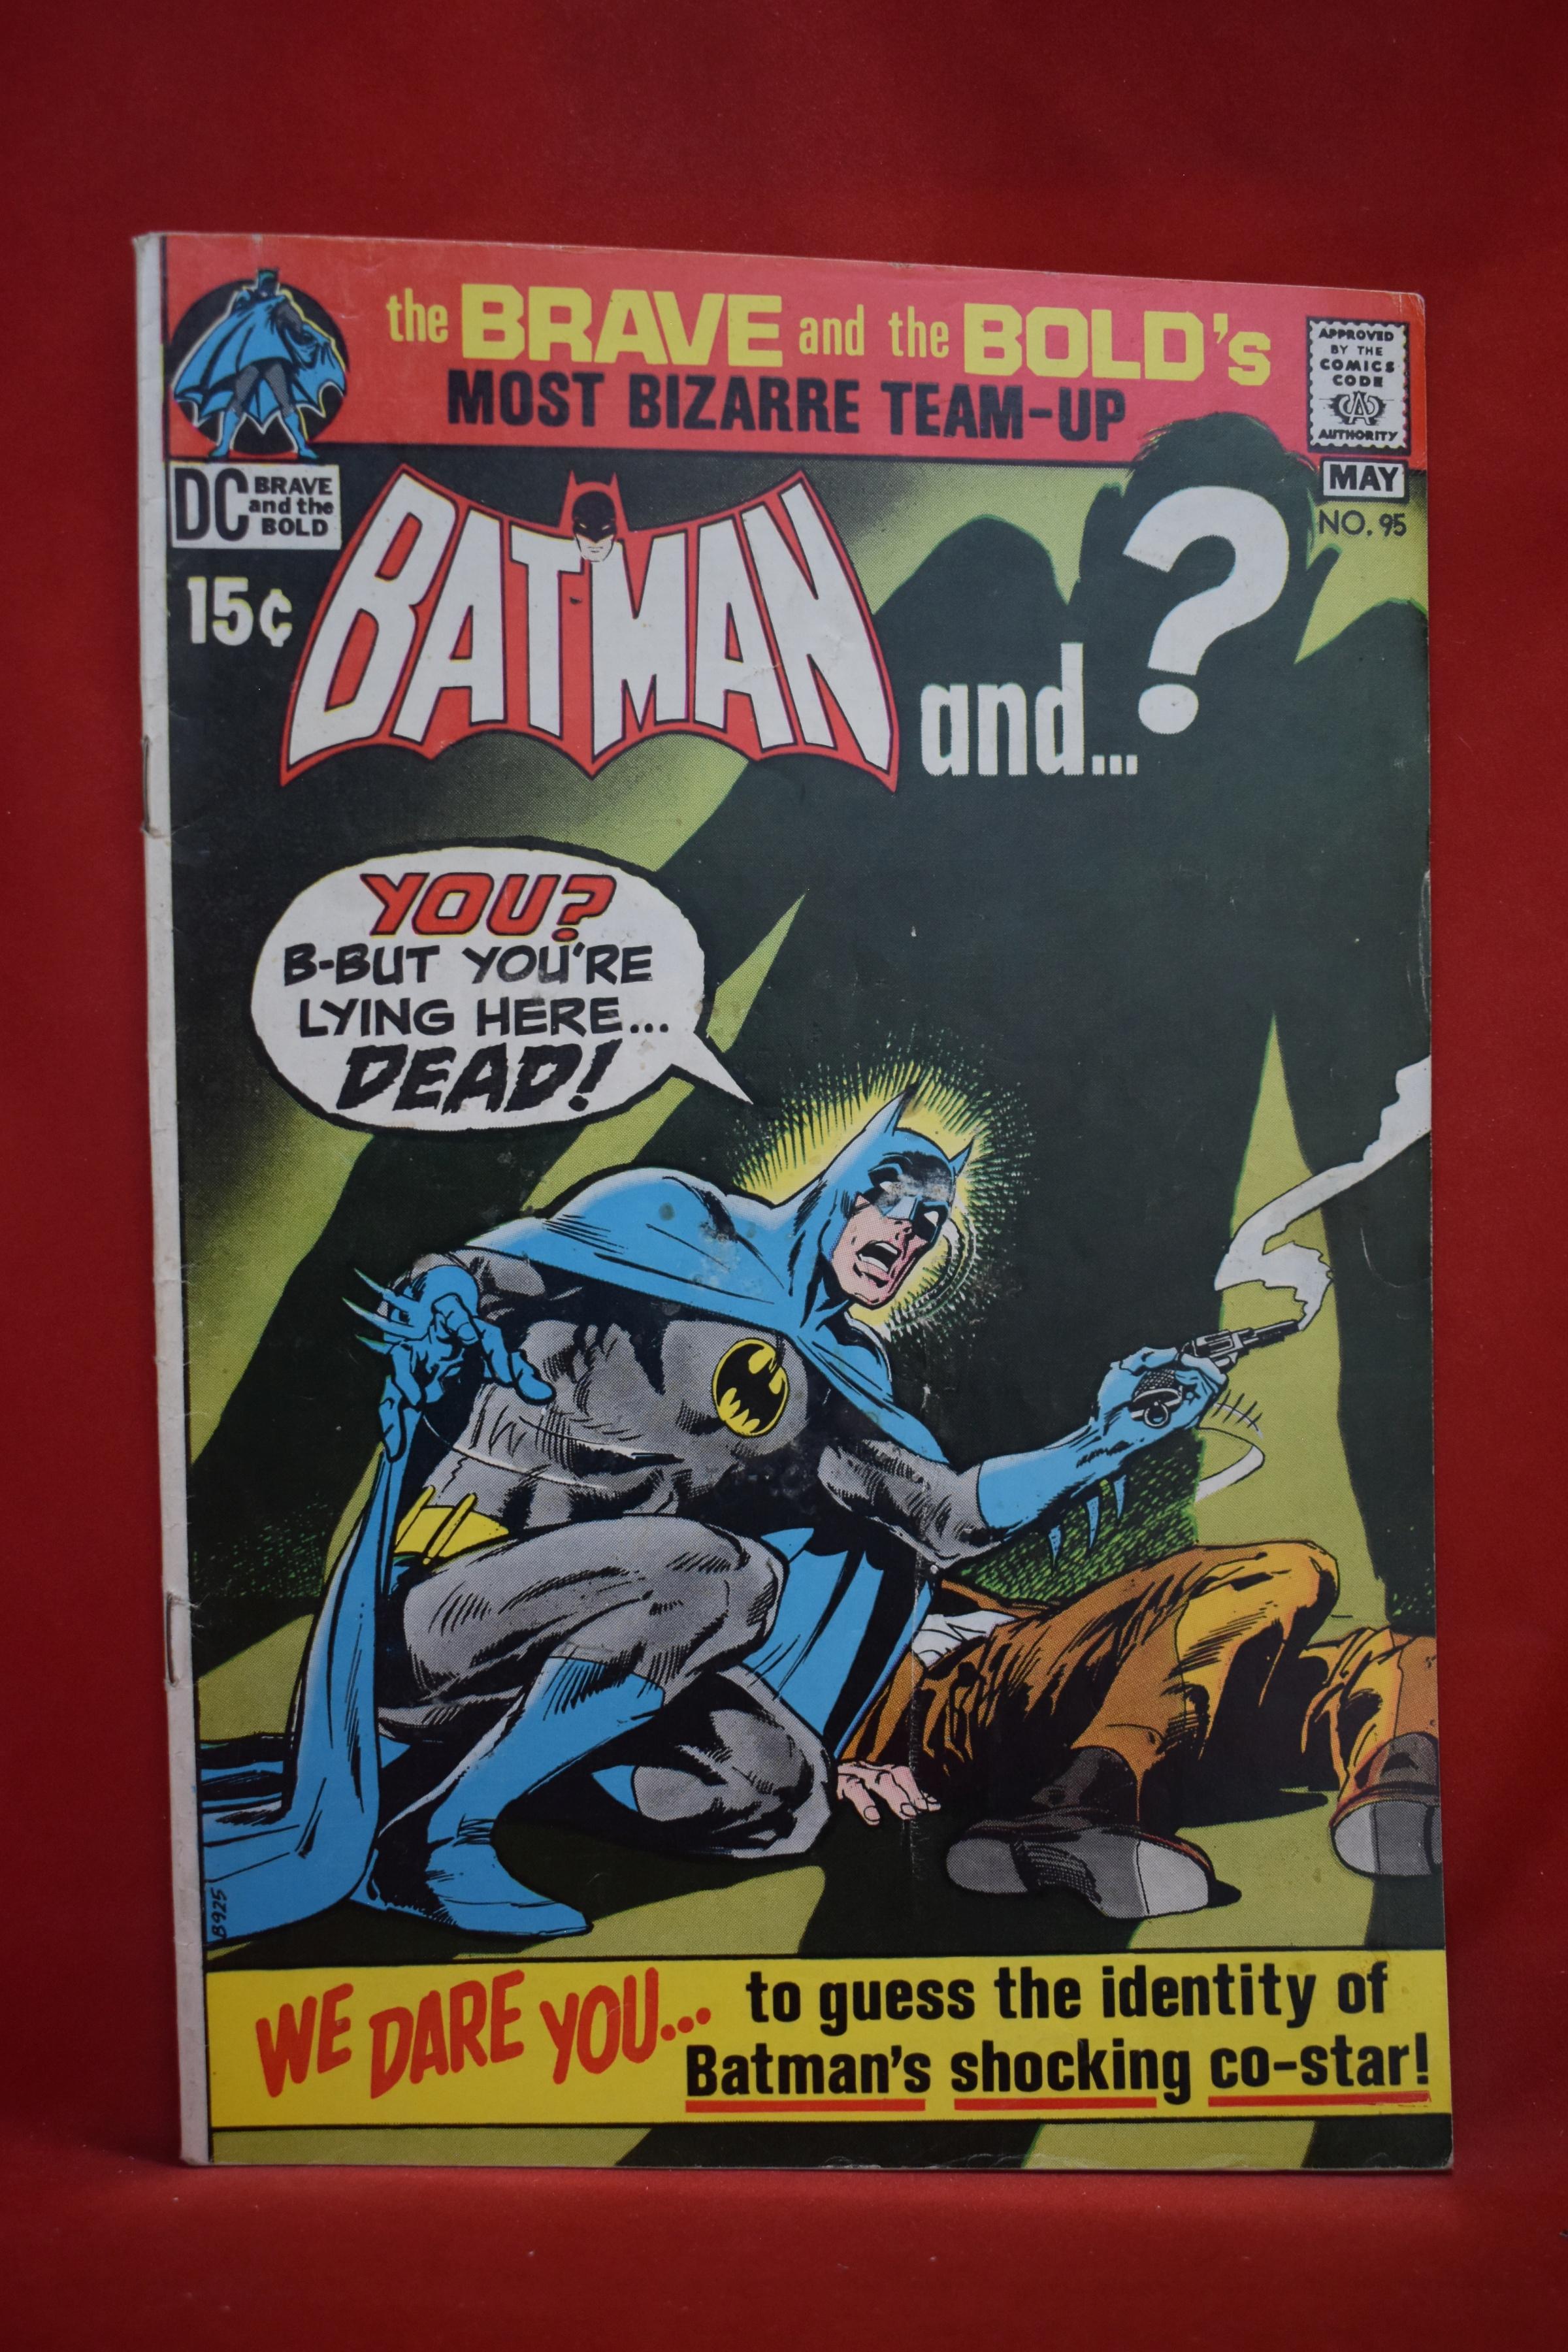 BRAVE AND THE BOLD #95 | 1ST APP OF RUBY RYDER | CLASSIC NEAL ADAMS